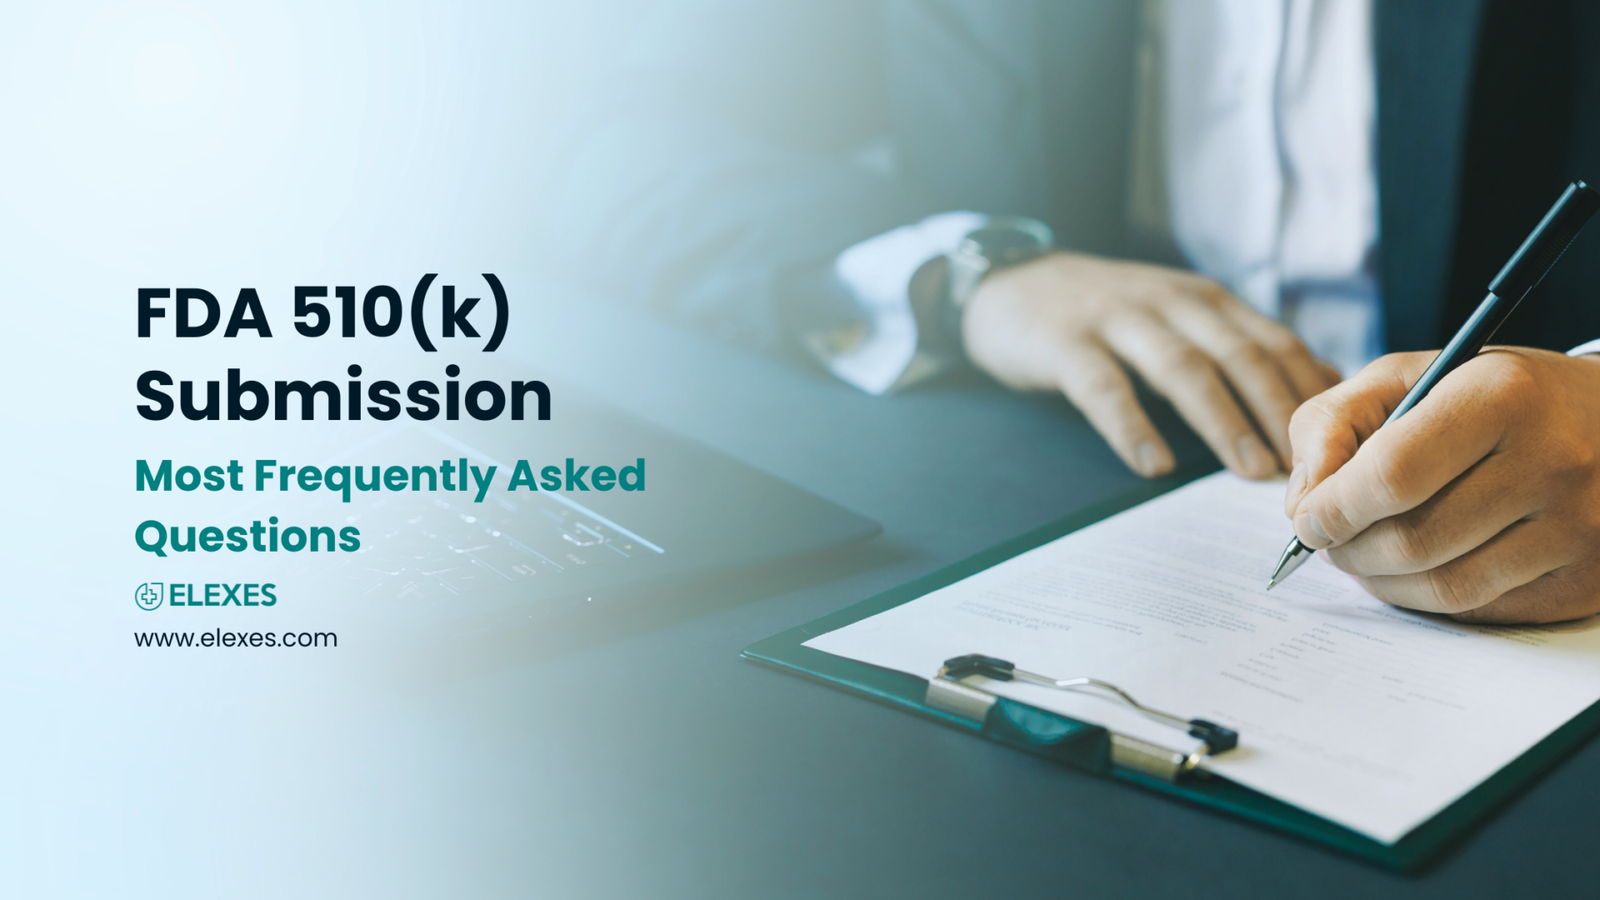 Most Frequently Asked Questions About FDA 510(k) Submission